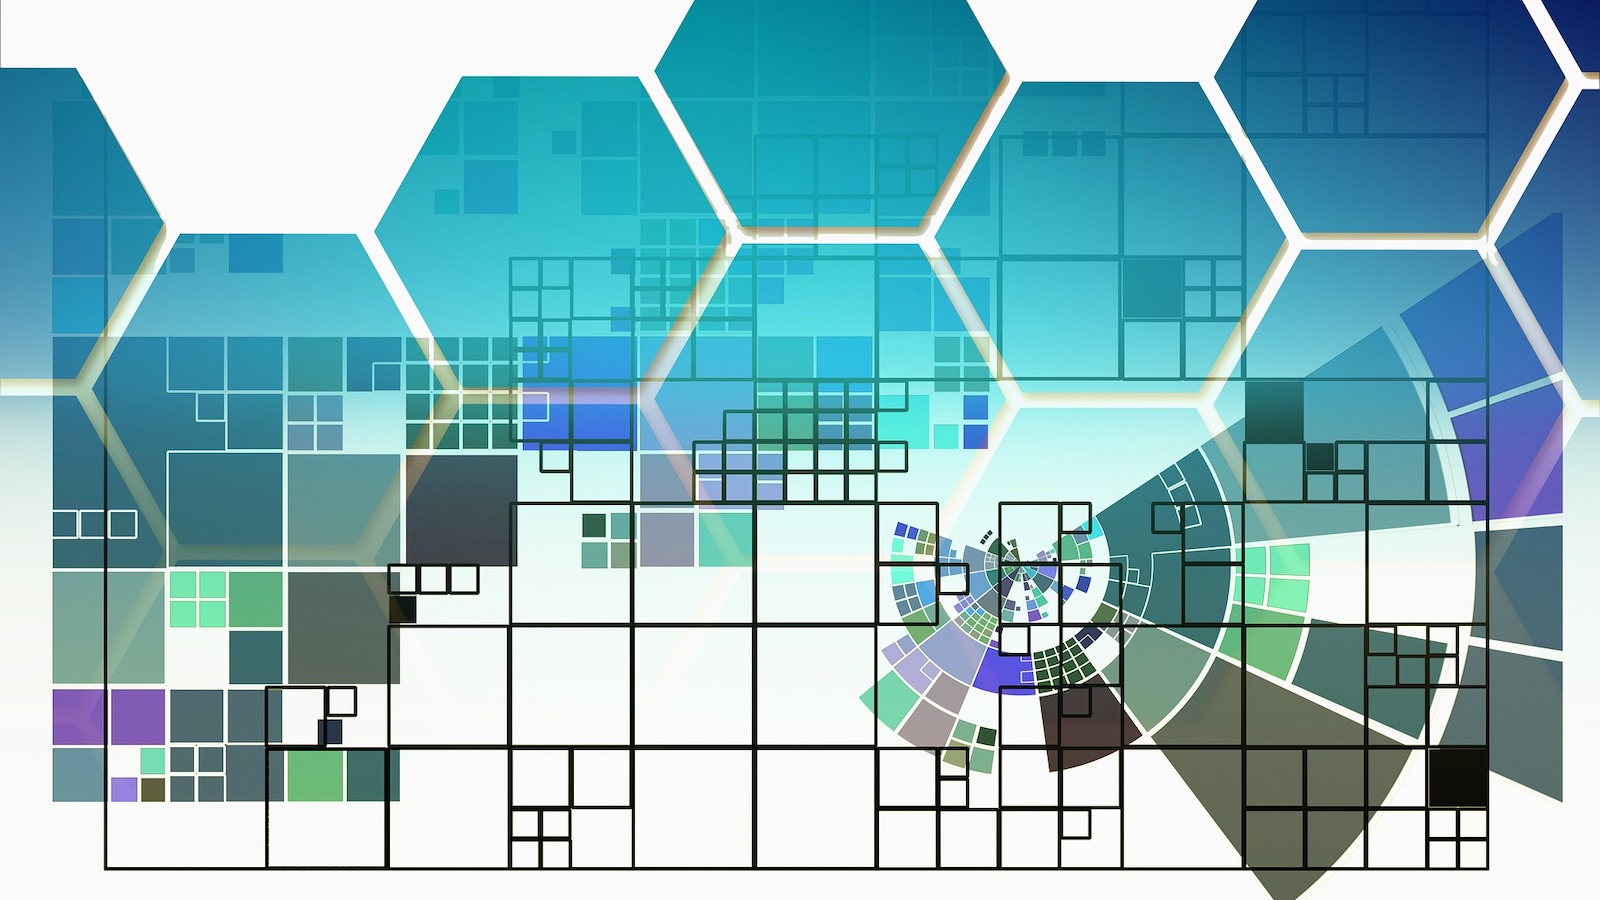 Hexagons in the background and squares of various sizes in the foreground